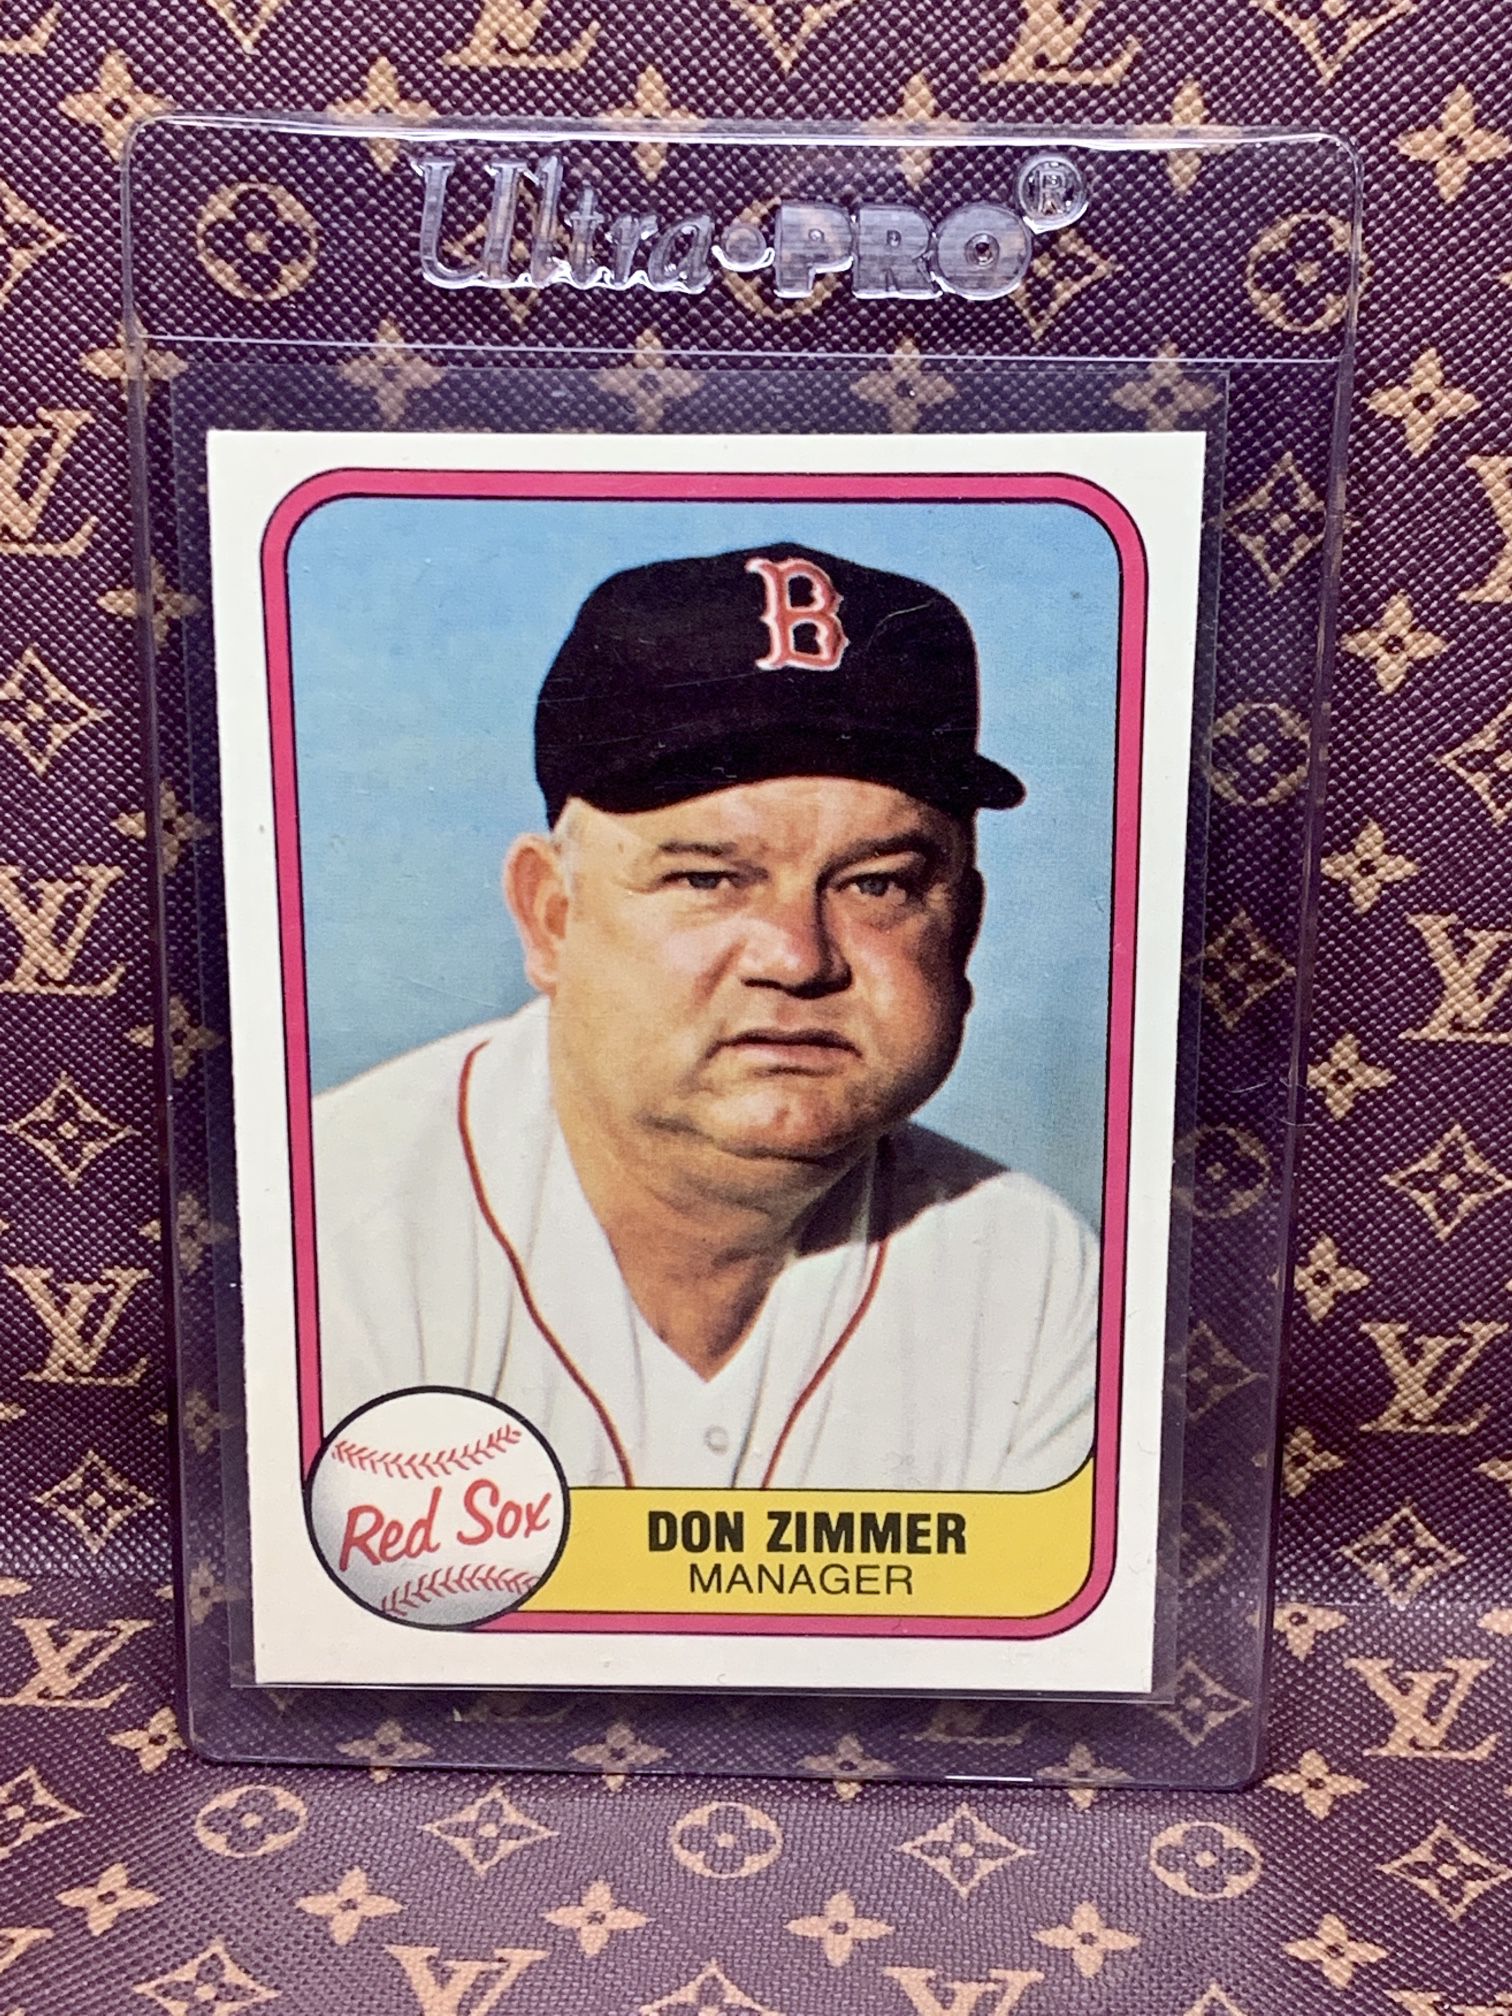 Vintage Don Zimmer Baseball Card for Sale in Los Angeles, CA - OfferUp